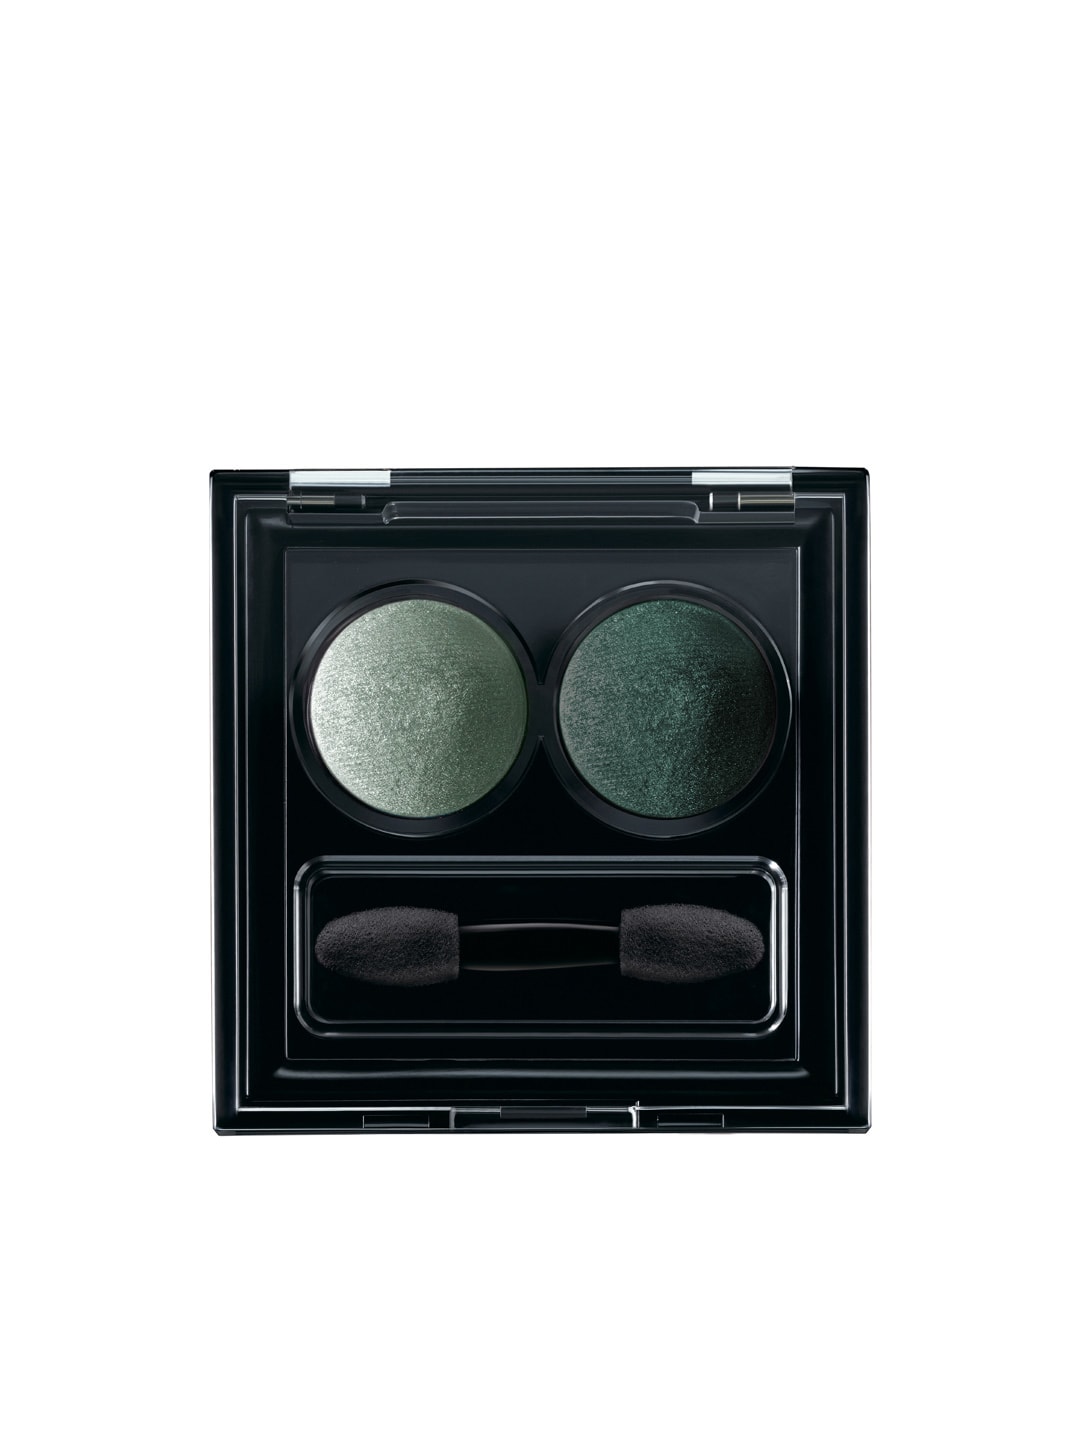 Lakme Absolute Eye Chromatic Day Queen Baked Eye Shadow